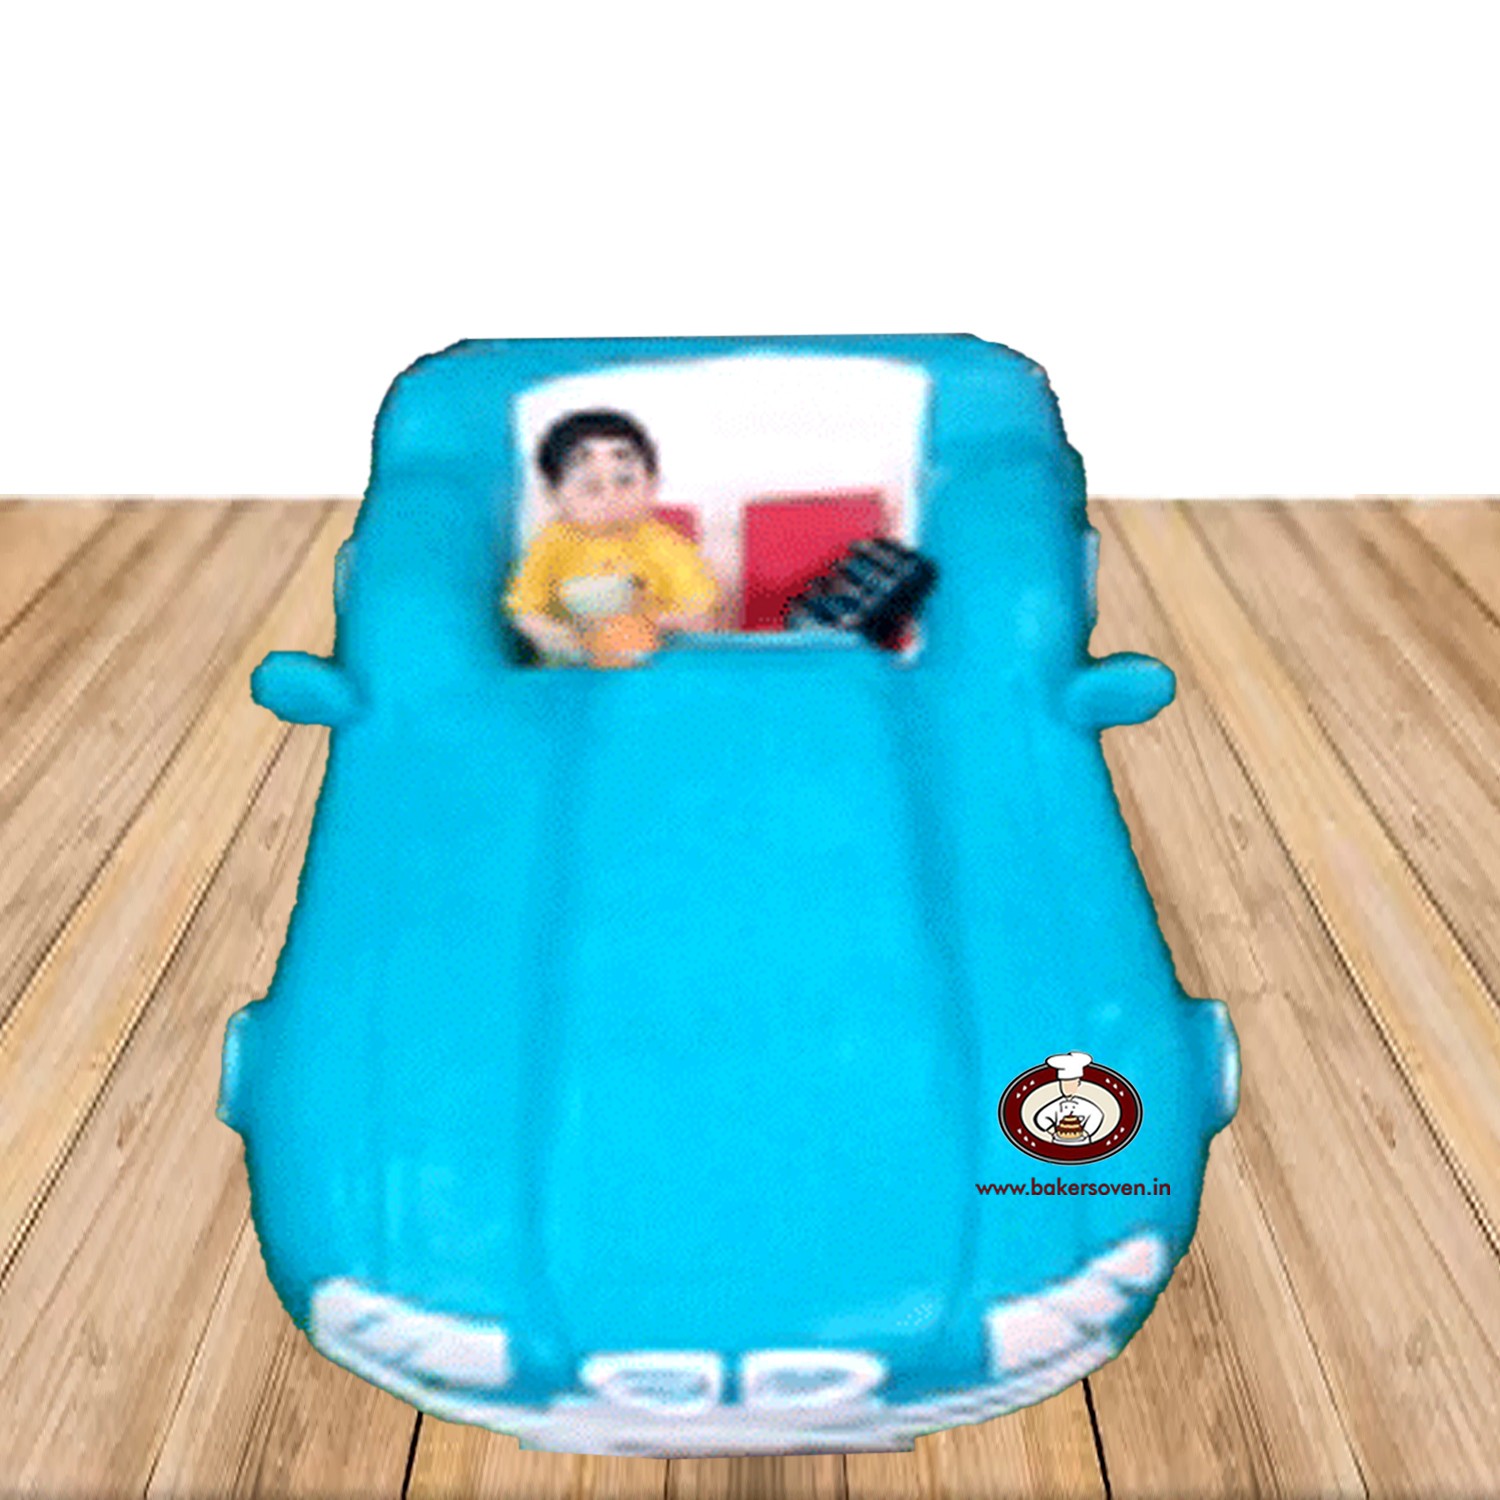 Coolest Car Cake Ideas and Images